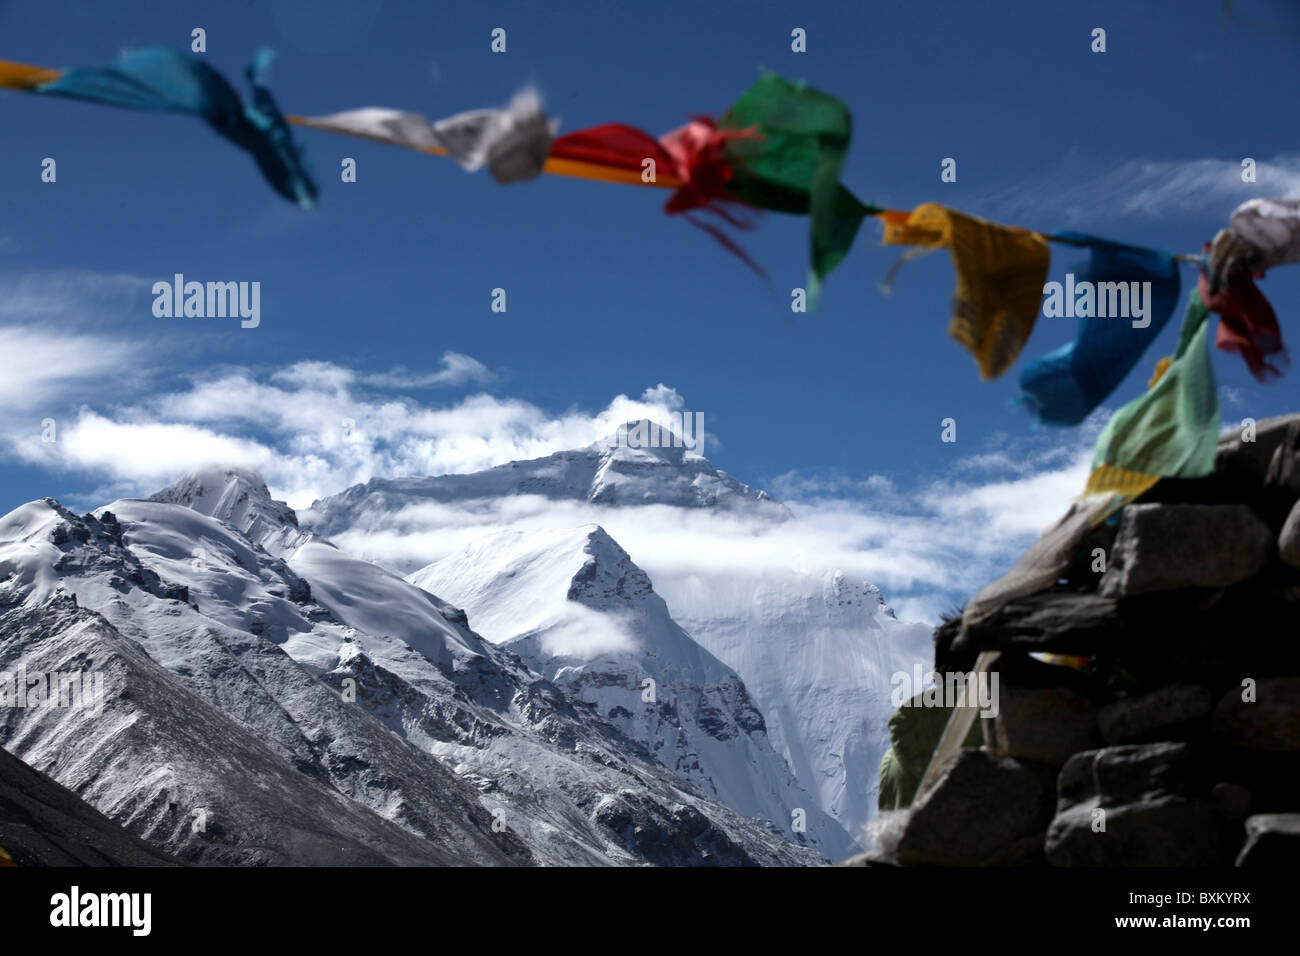 A view of the north face of Everest or Qomolangma with Buddhist prayer flags seen from base camp or ebc in Tibet, China. Stock Photo